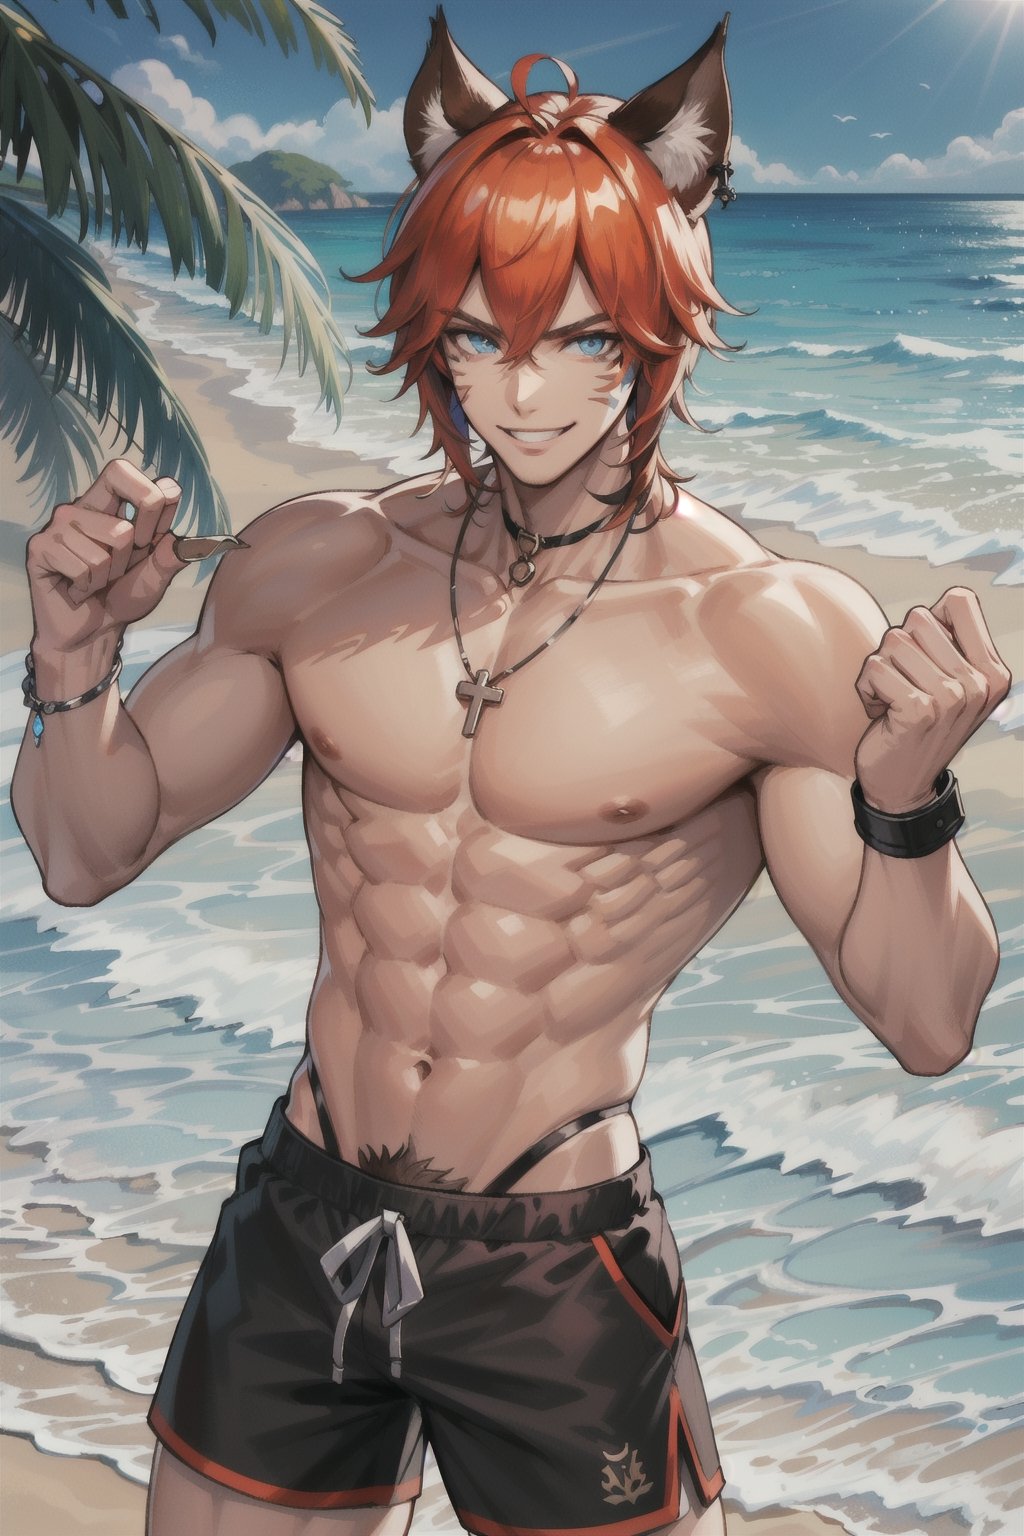 Gladi, Blue eyes, facial mark, beach, beach_shorts, shirtless, muscles, smile, champion, fighting, necklace